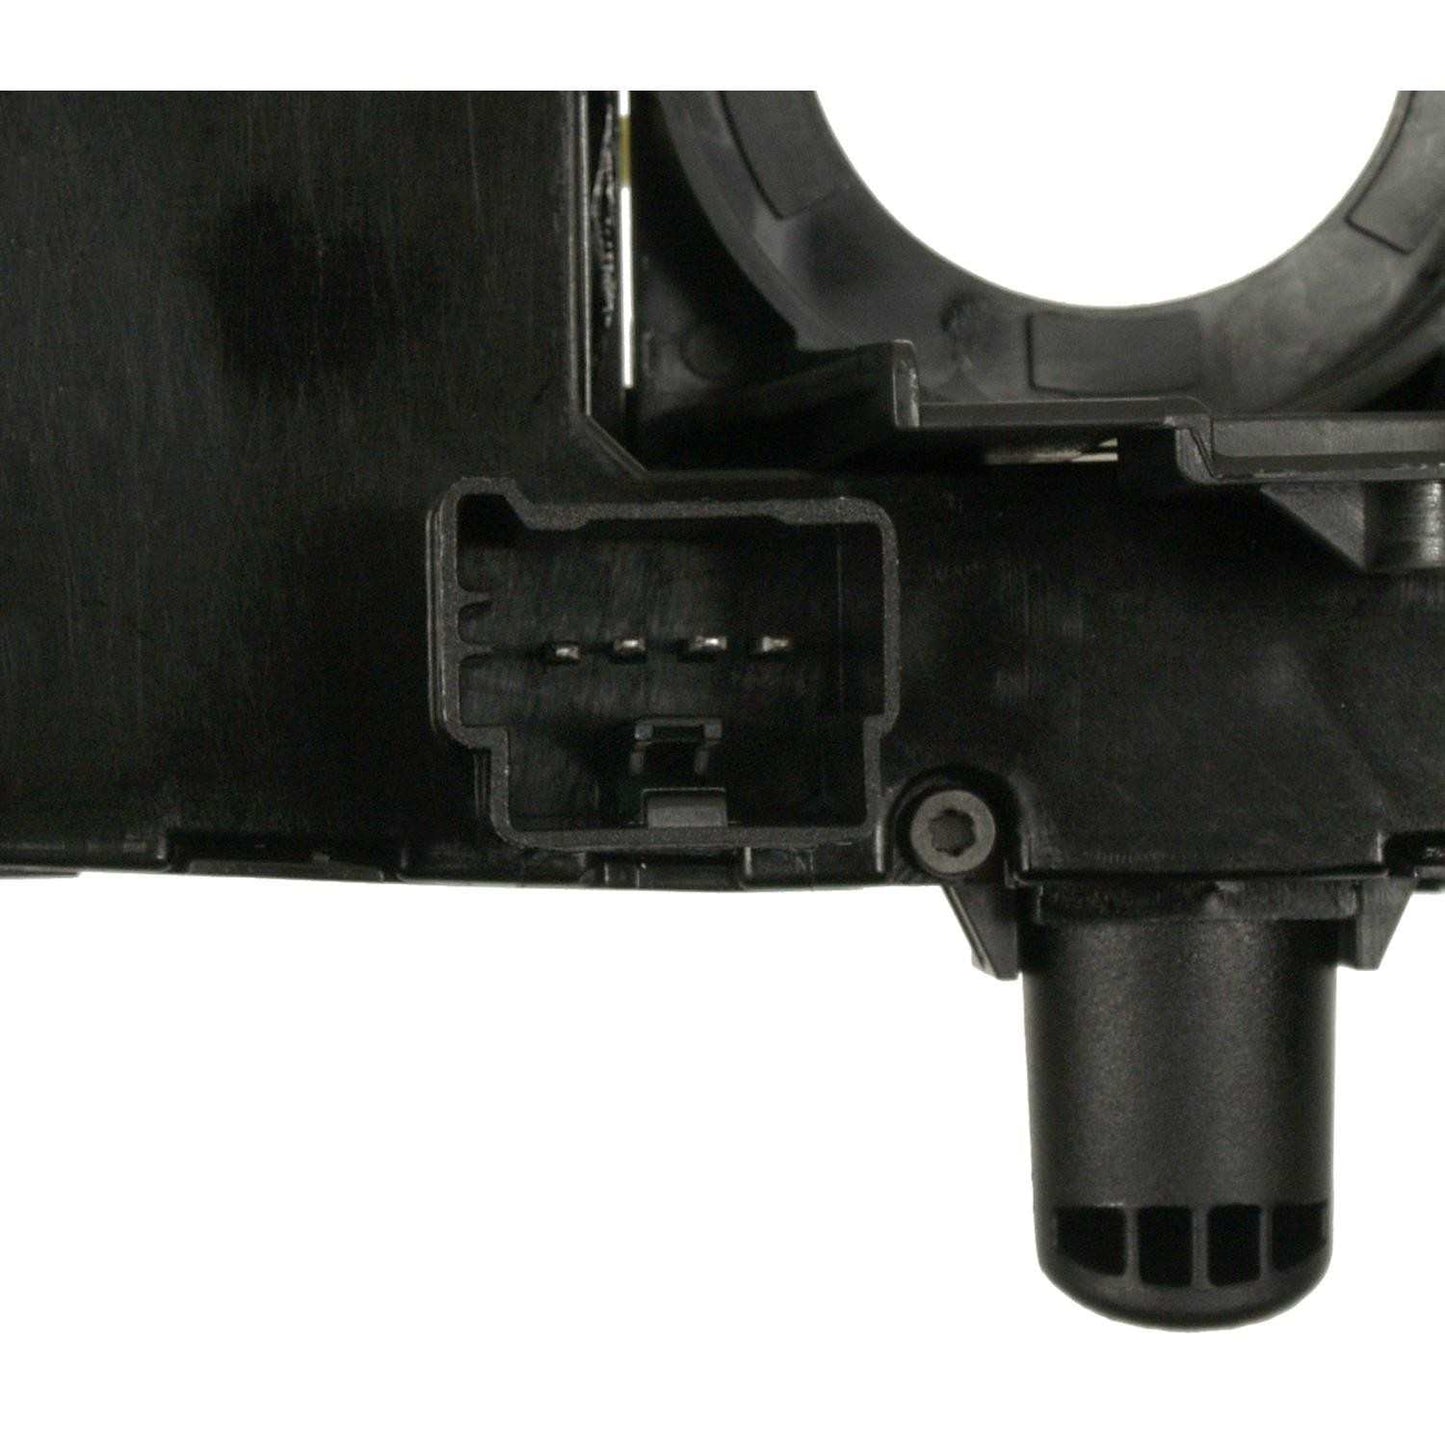 Other View of Windshield Wiper Switch TRUE-TECH SMP CBS1338T